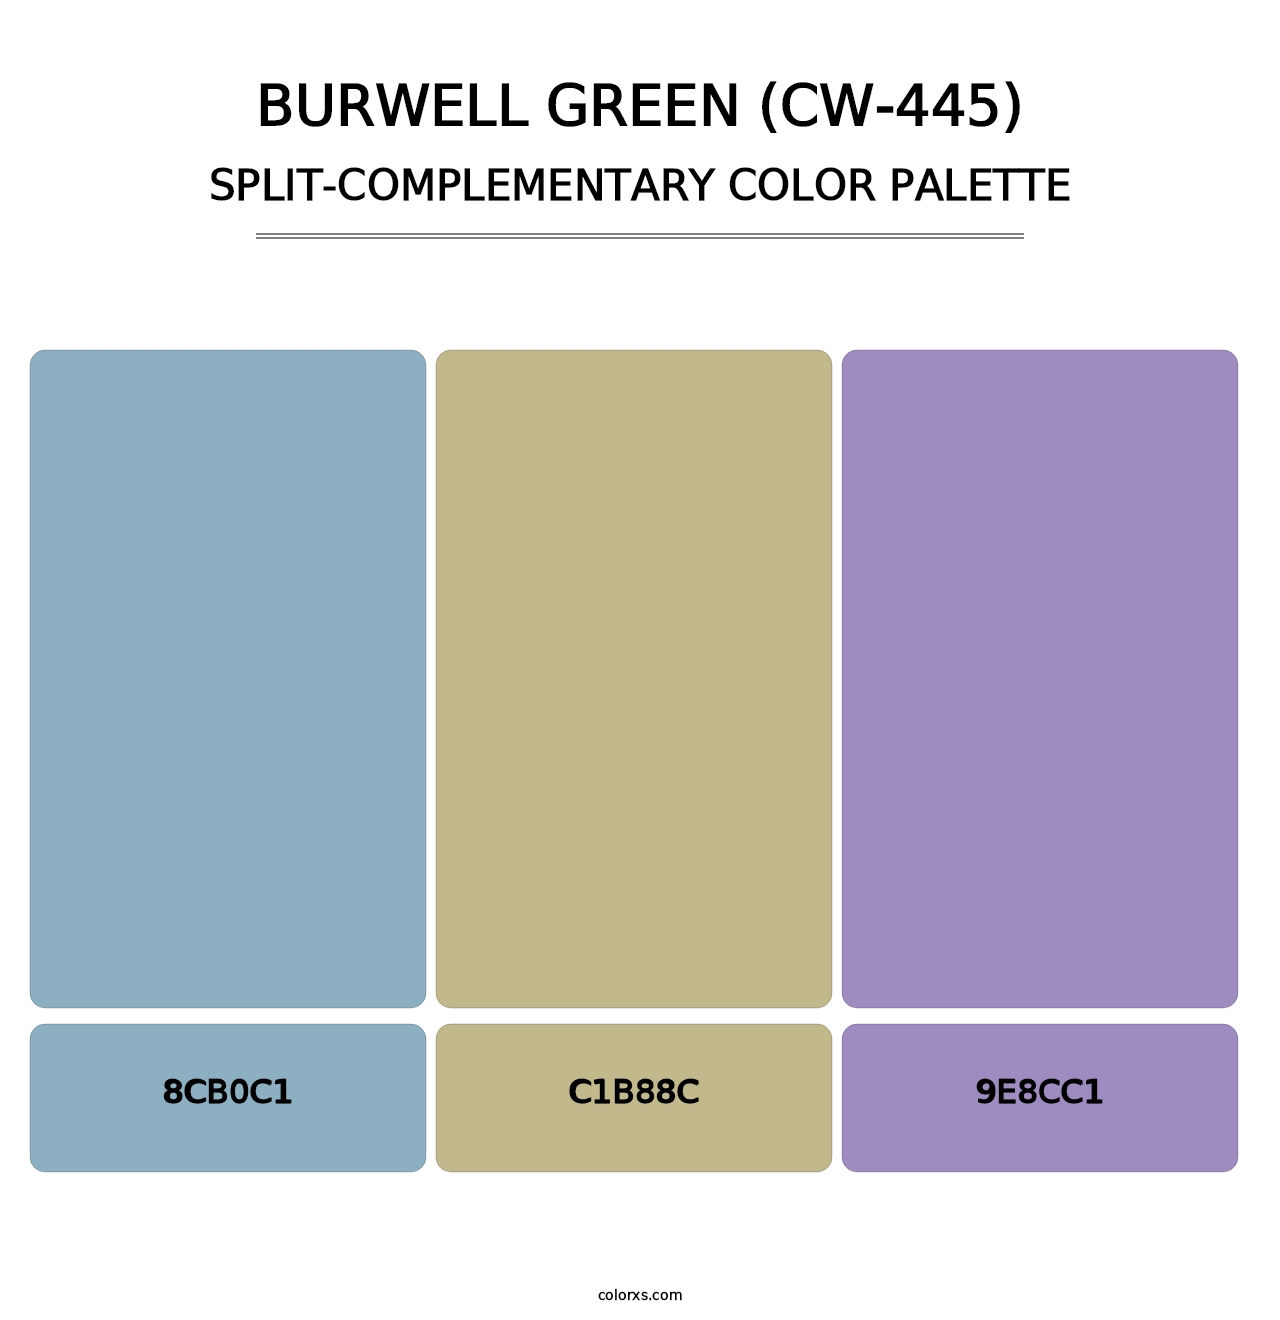 Burwell Green (CW-445) - Split-Complementary Color Palette